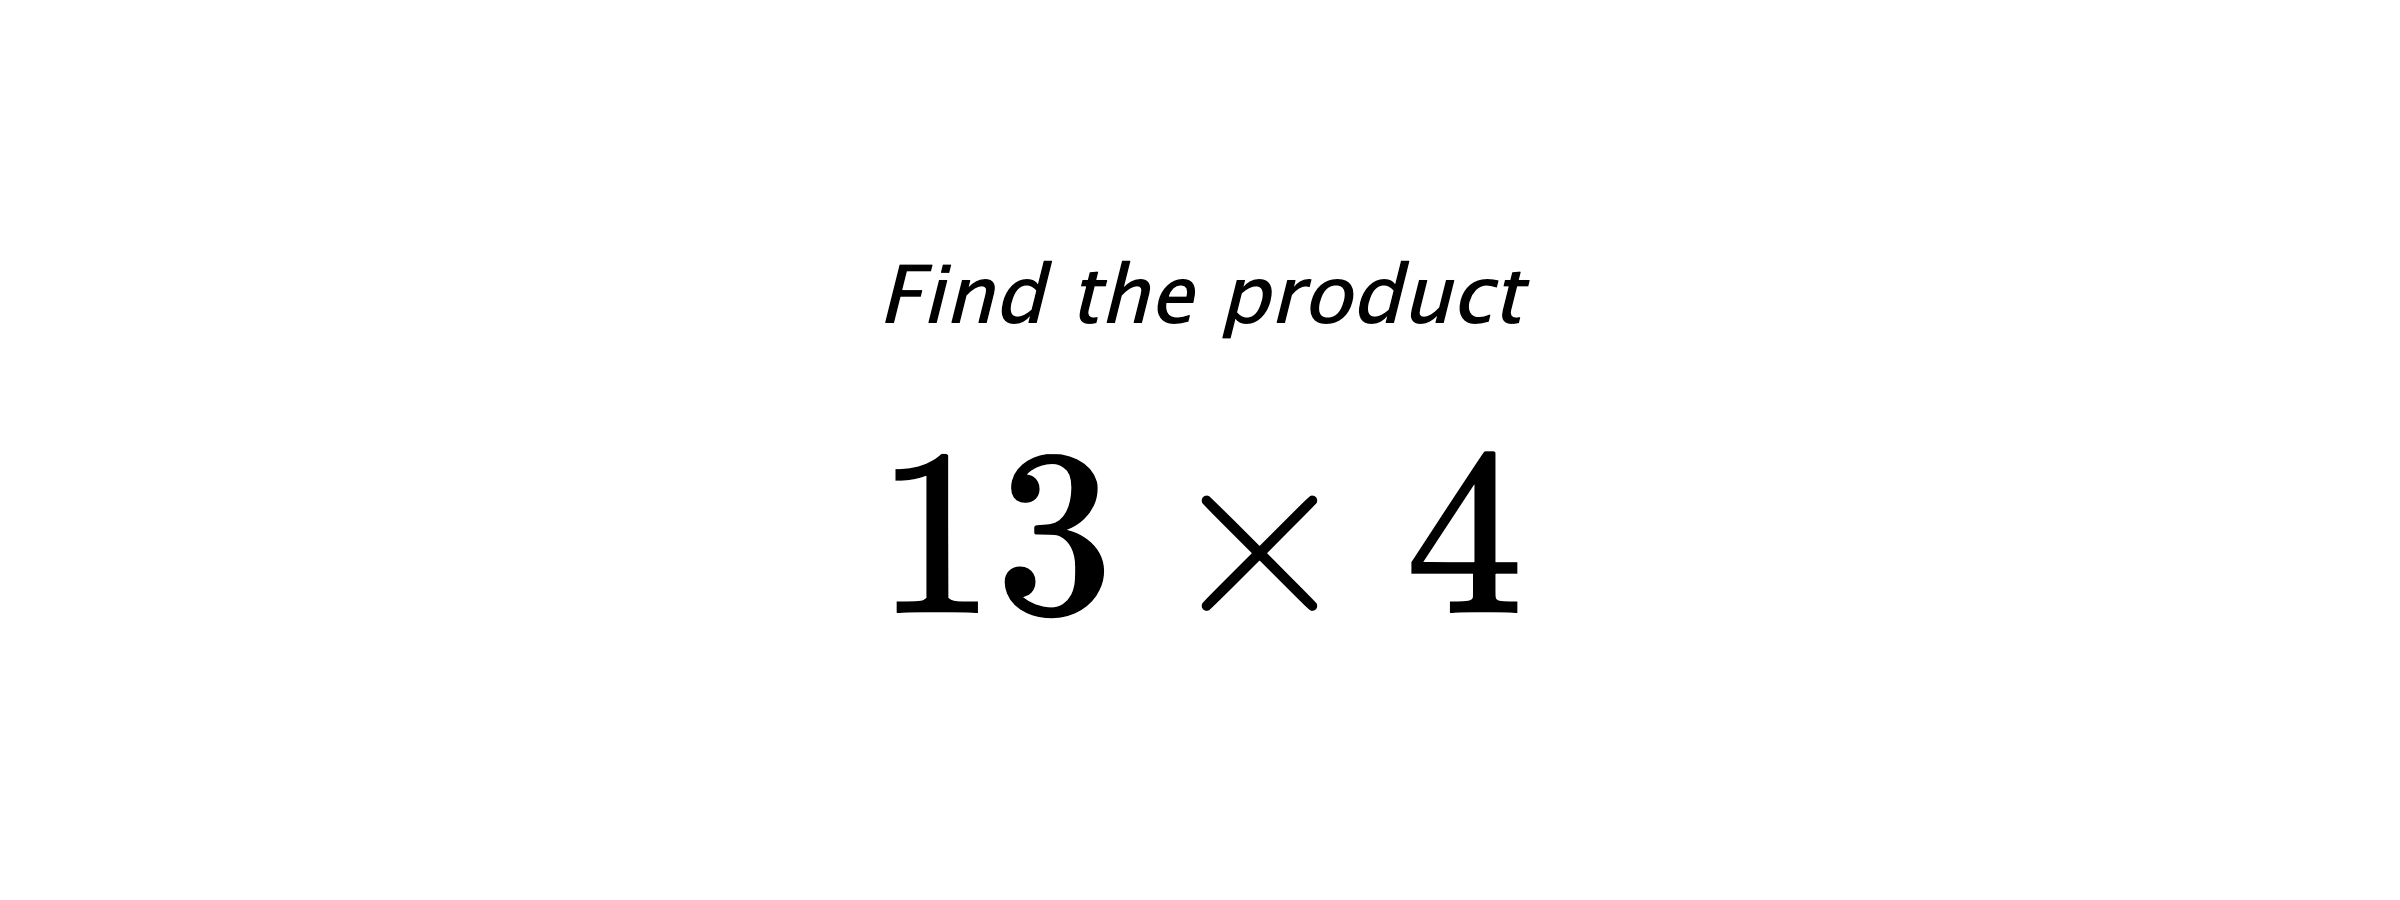 Find the product $ 13 \times 4 $